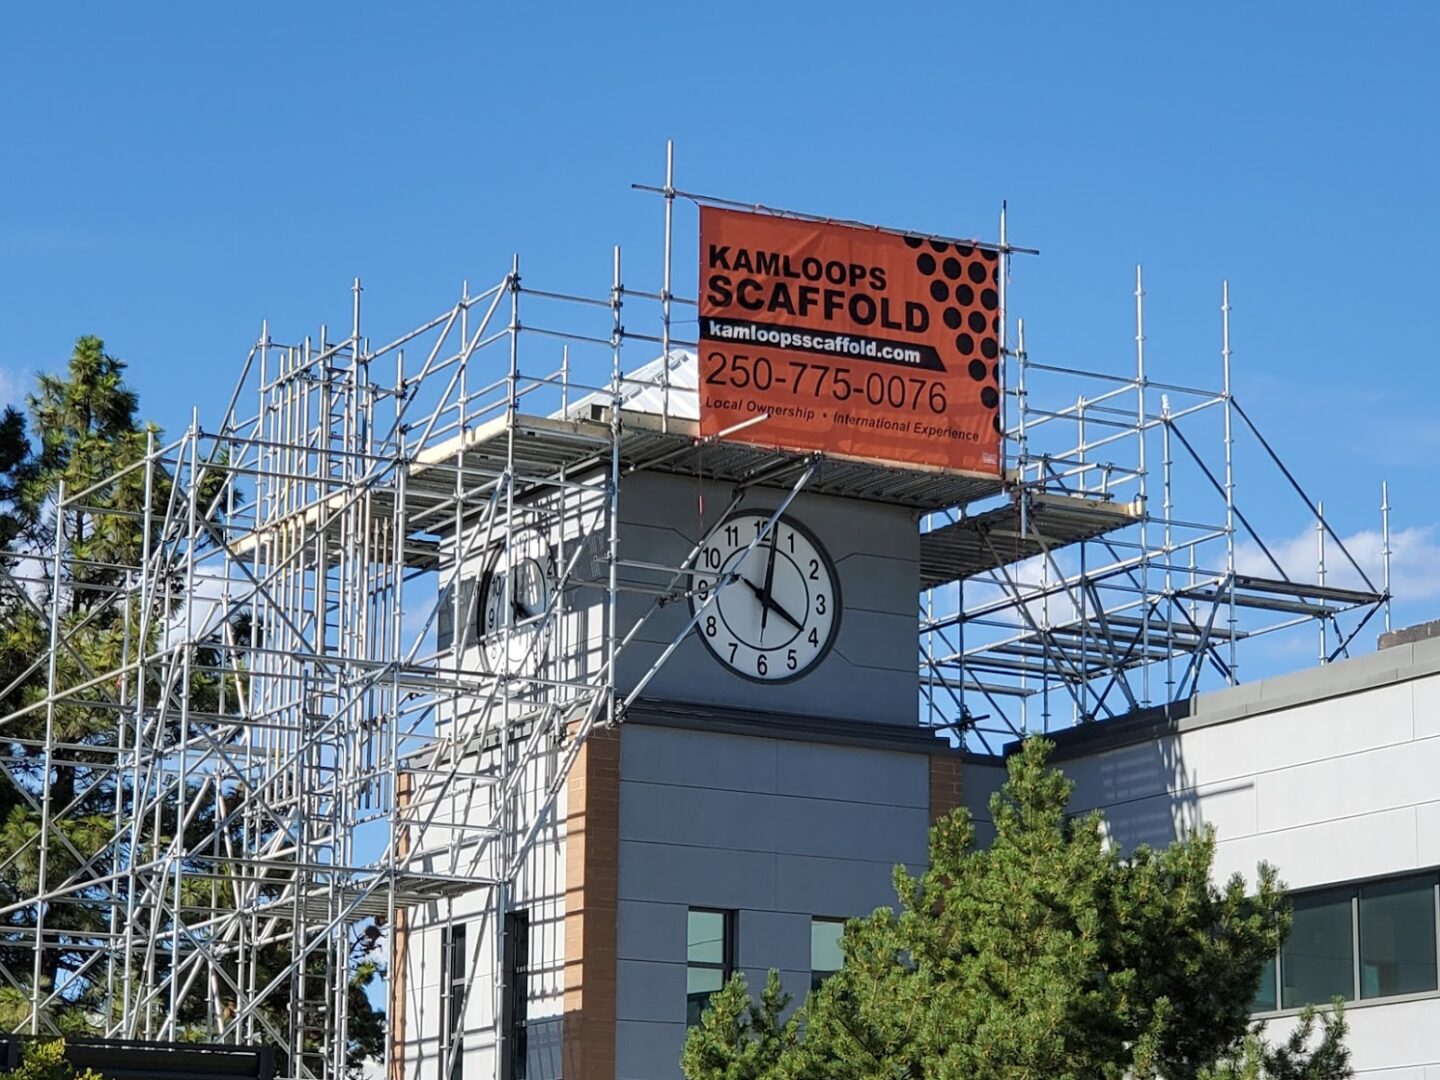 A clock tower with scaffolding around it.